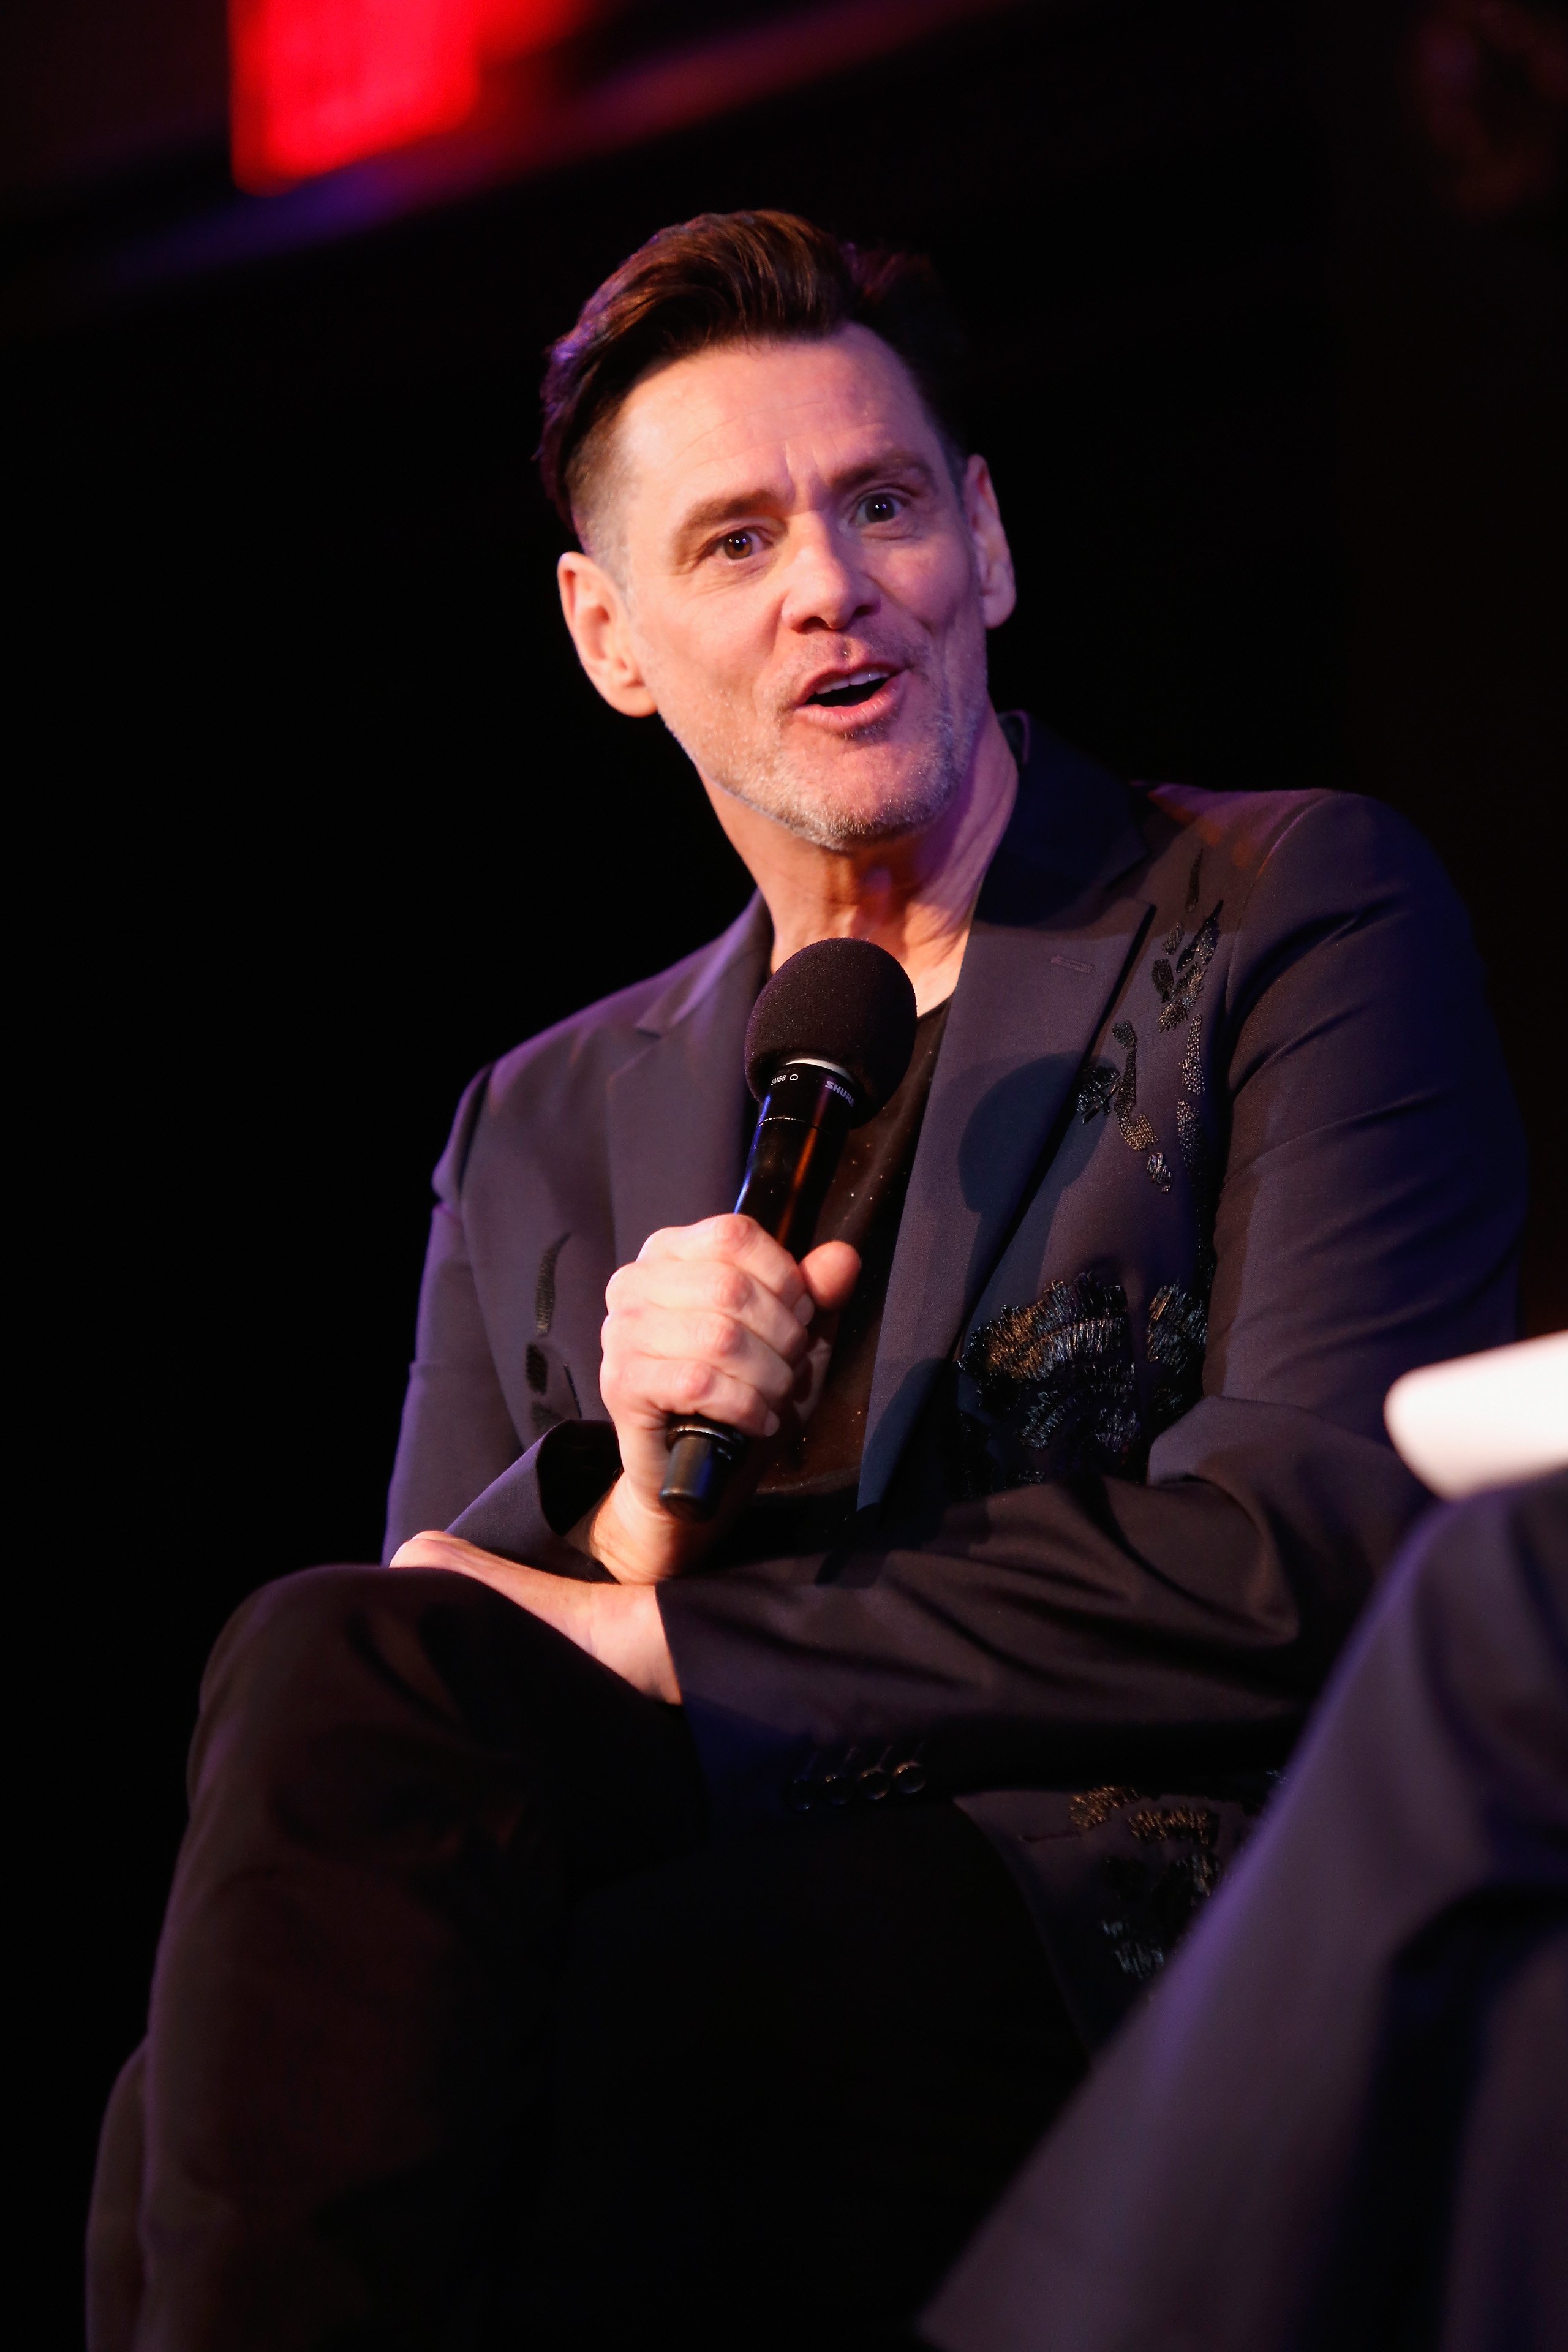 'It's Just Exploding': Jim Carrey on His New Career as an Artist and Political Cartoonist ...